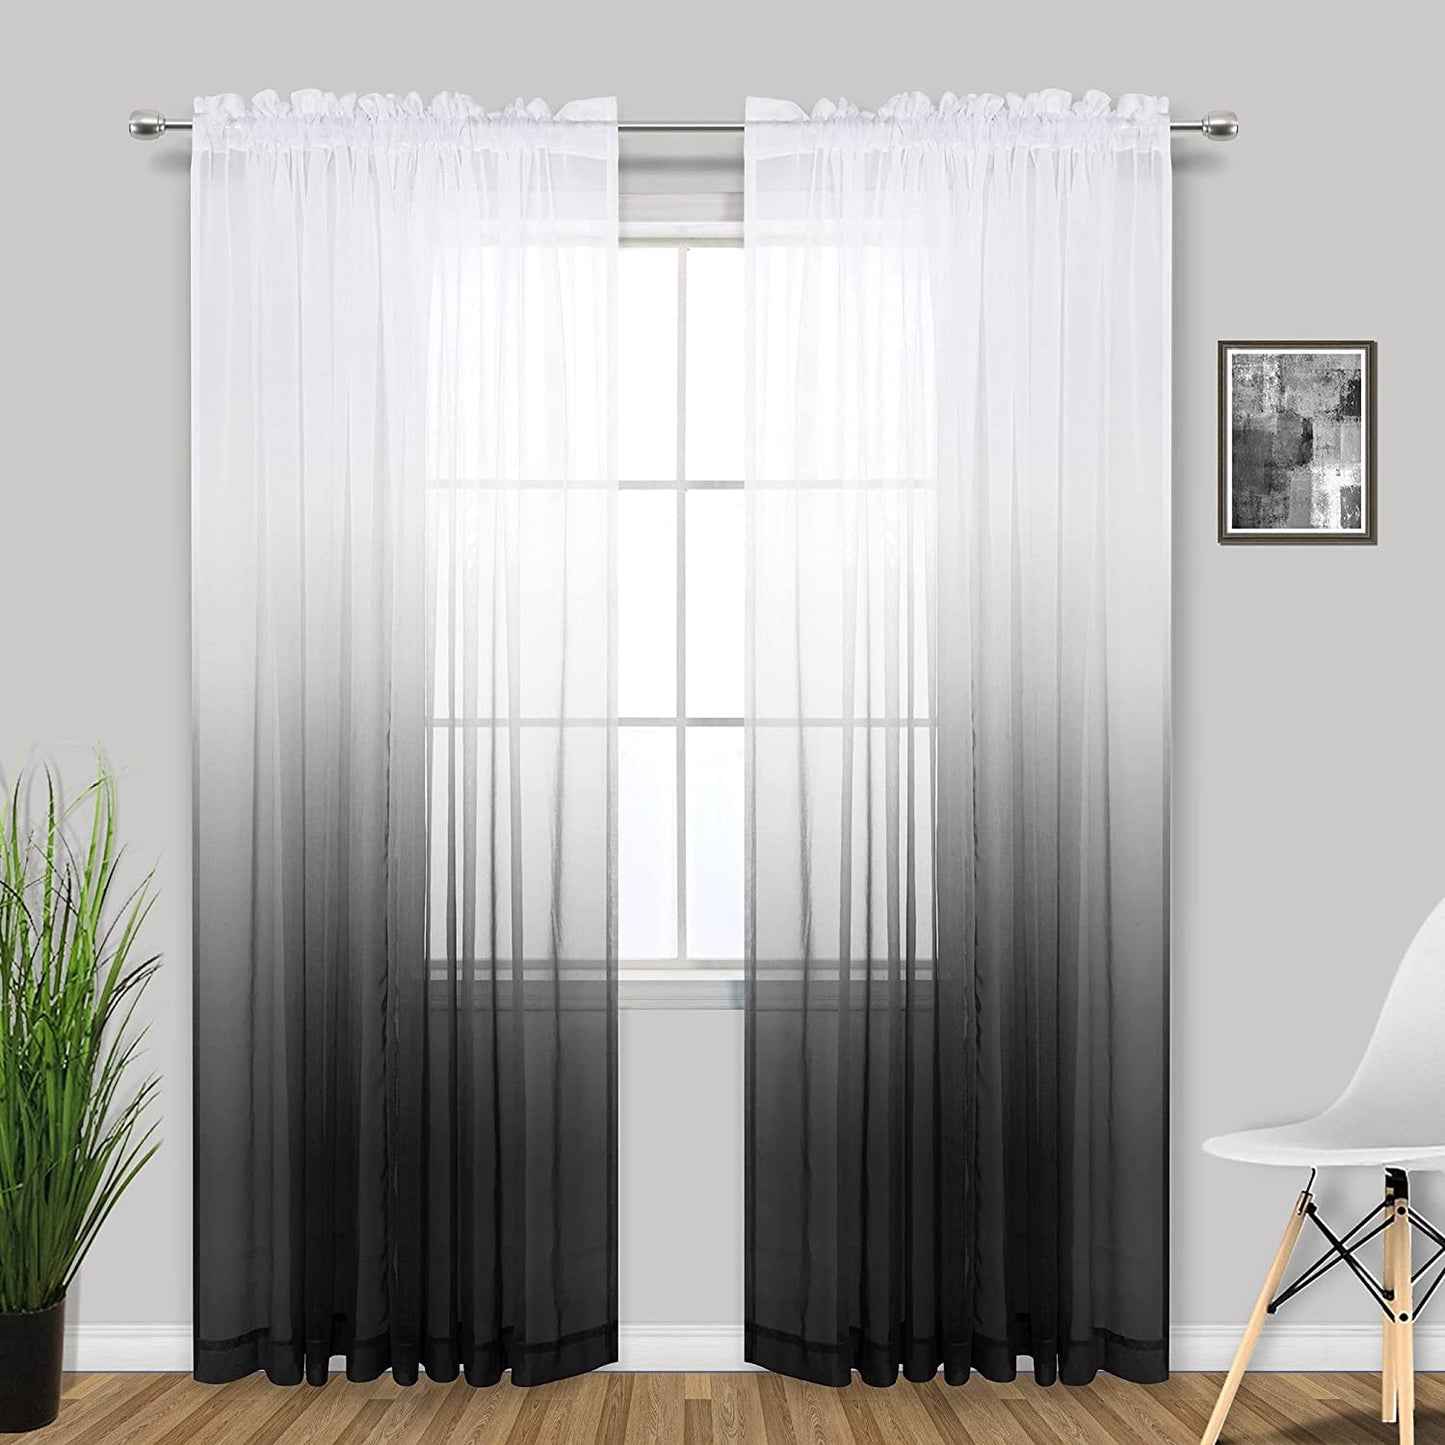 KOUFALL Sage Green Curtains 63 Inch Length for Living Room,2 Panel Set Rod Pocket Boho Curtains for Bedroom 63 Inches Long  KOUFALL TEXTILE Black 52X84 